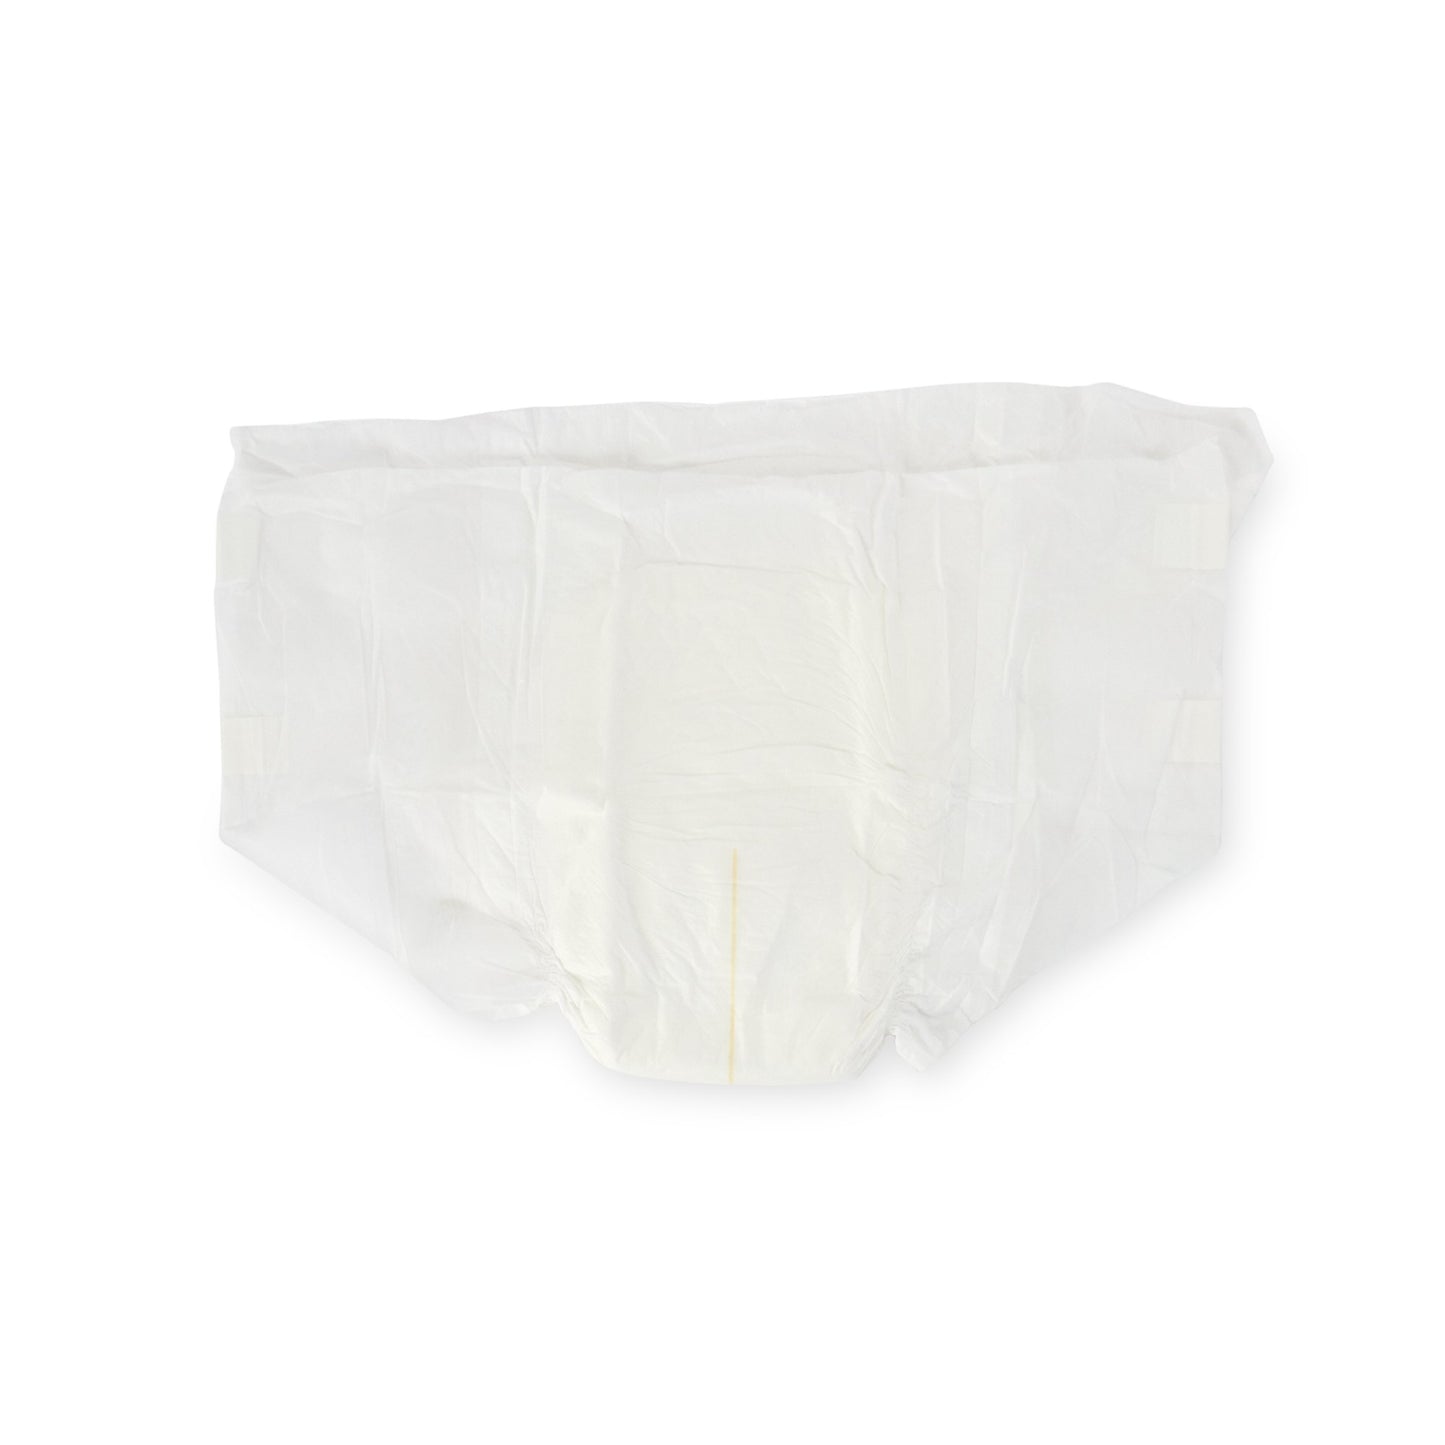 Wings™ Super Quilted Maximum Absorbency Incontinence Brief, Medium, 12 ct